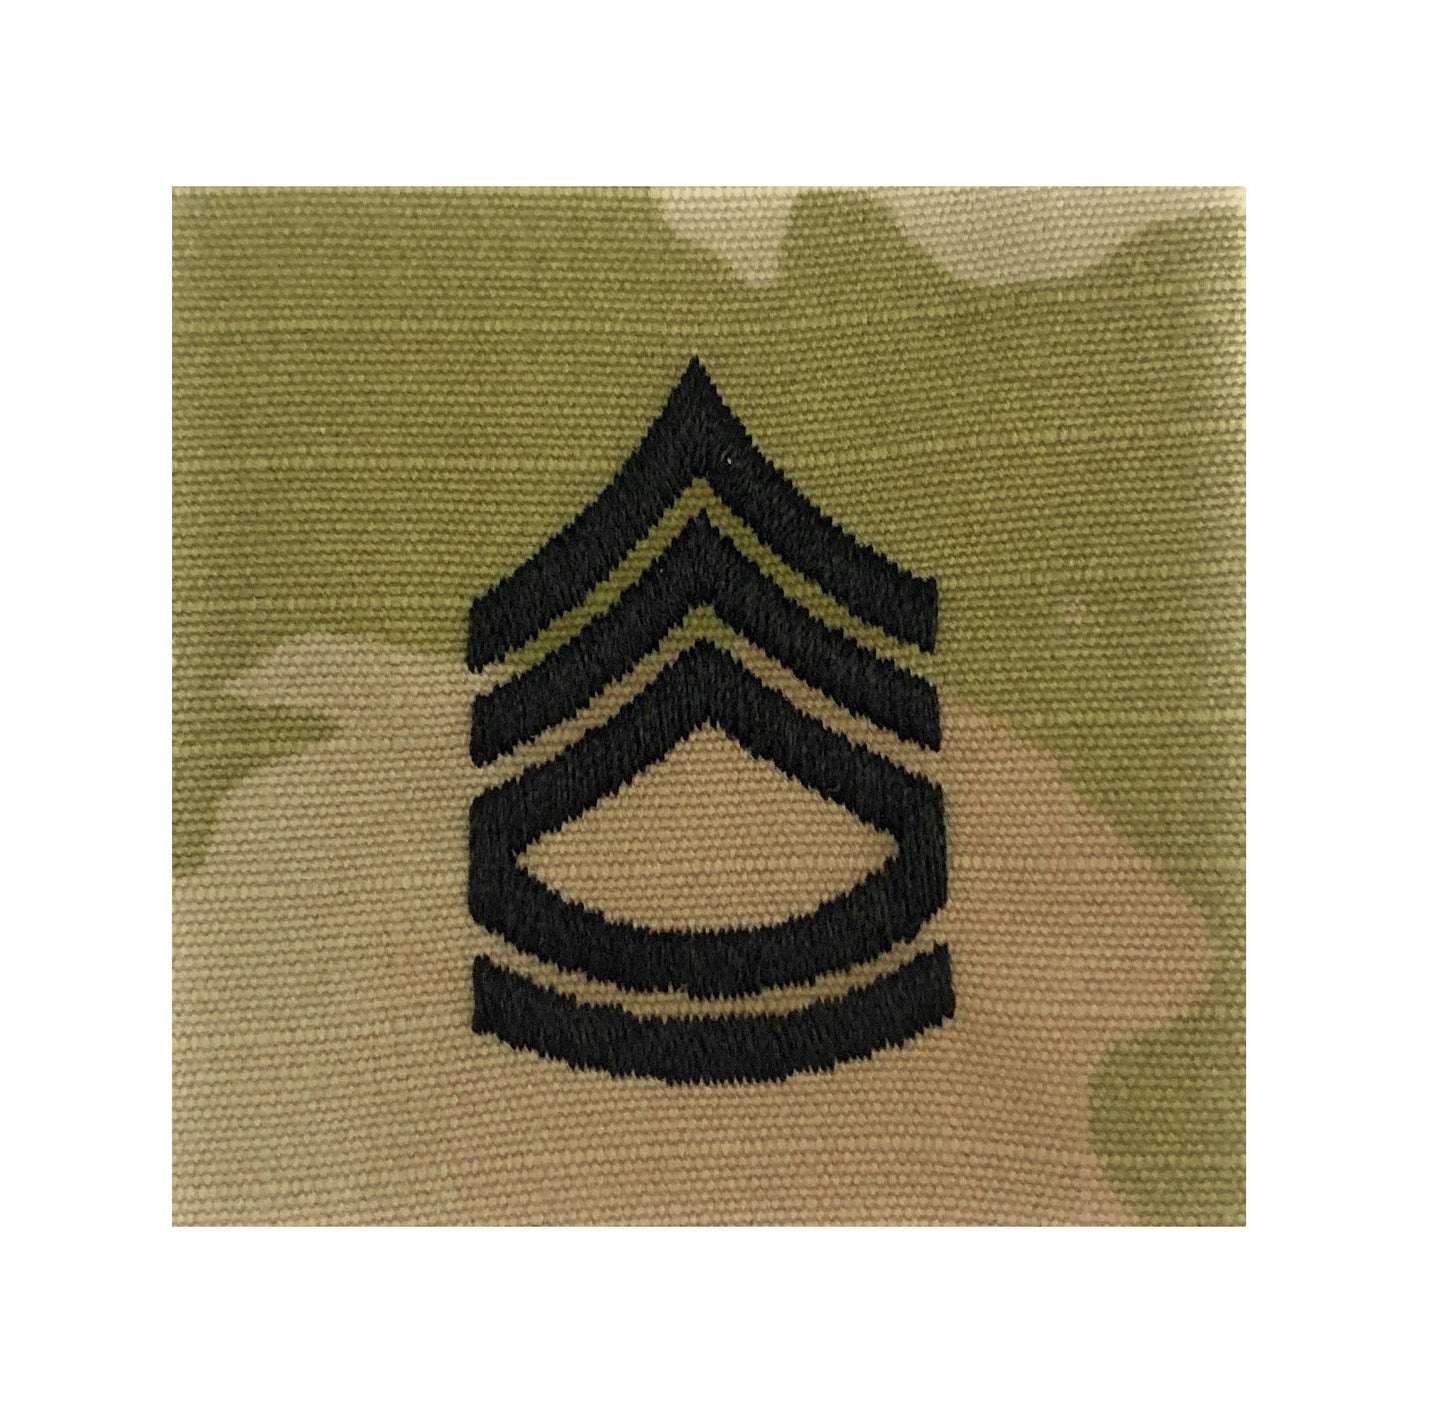 US Army E7 Sergeant First Class OCP 2x2 Sew-On Rank For Shirt,Jacket,Coat